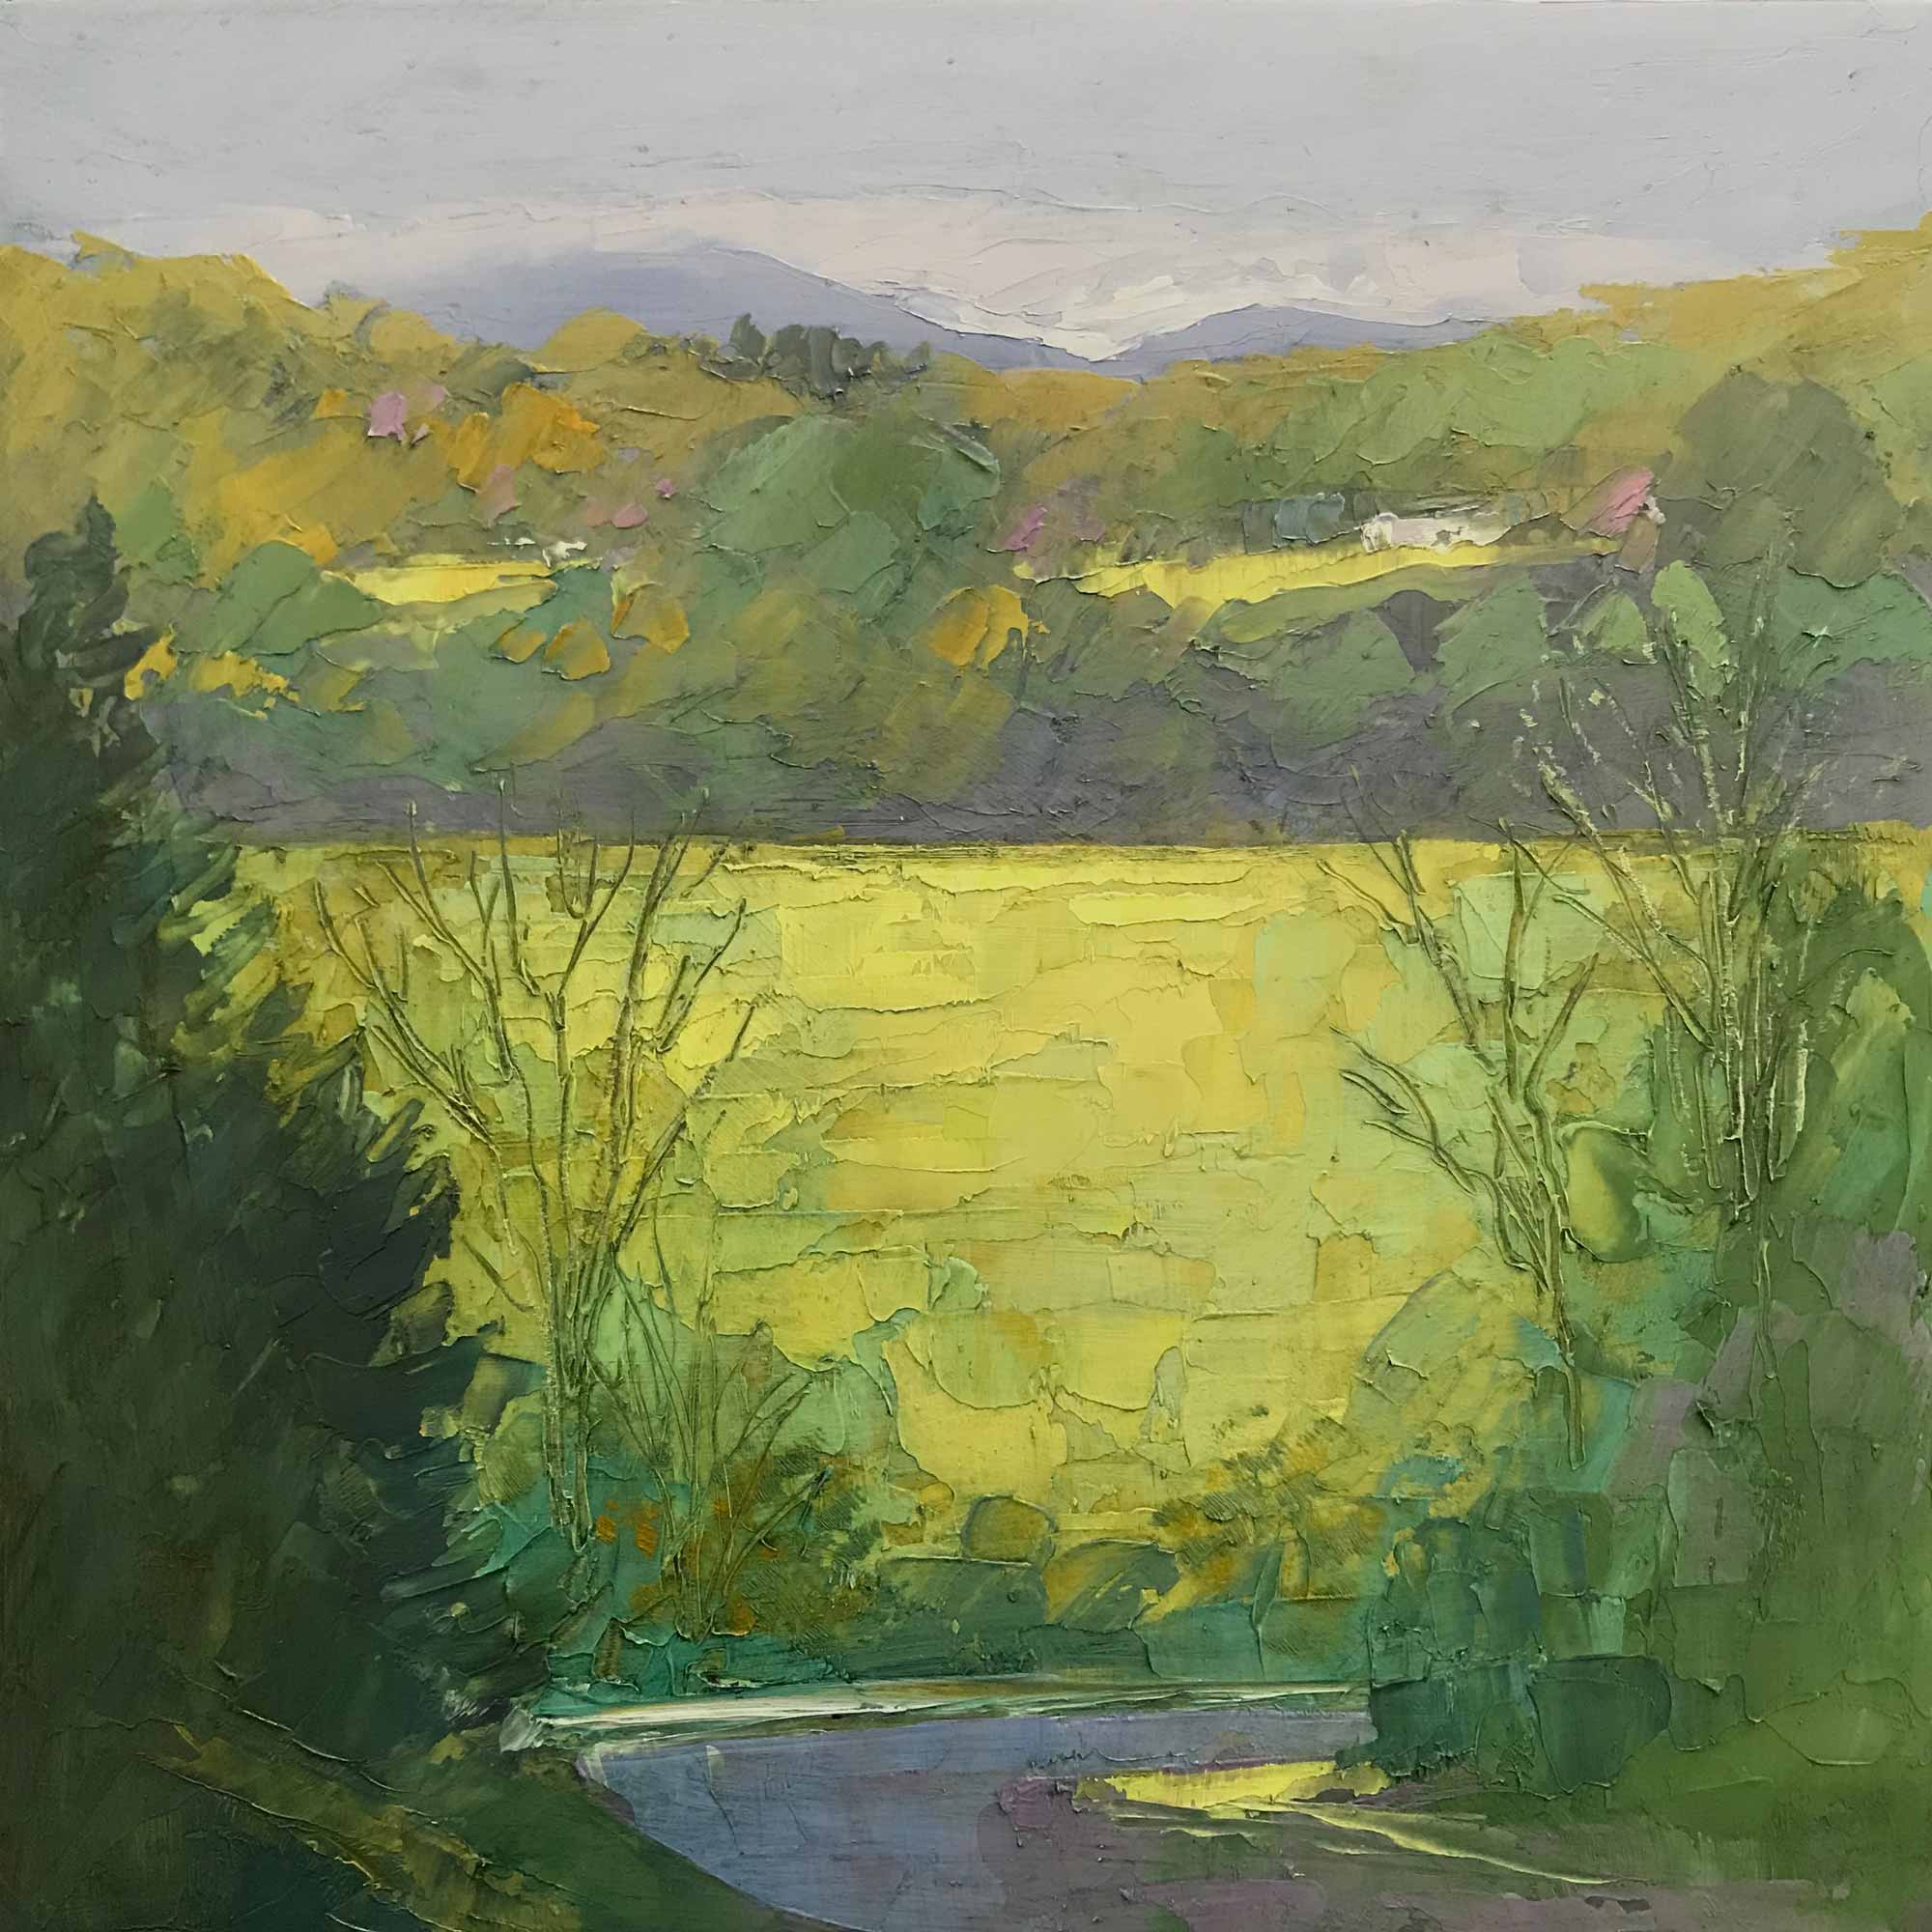 View from the Ridge No. 33, oil on panel, 8 x 8 inches, 2019